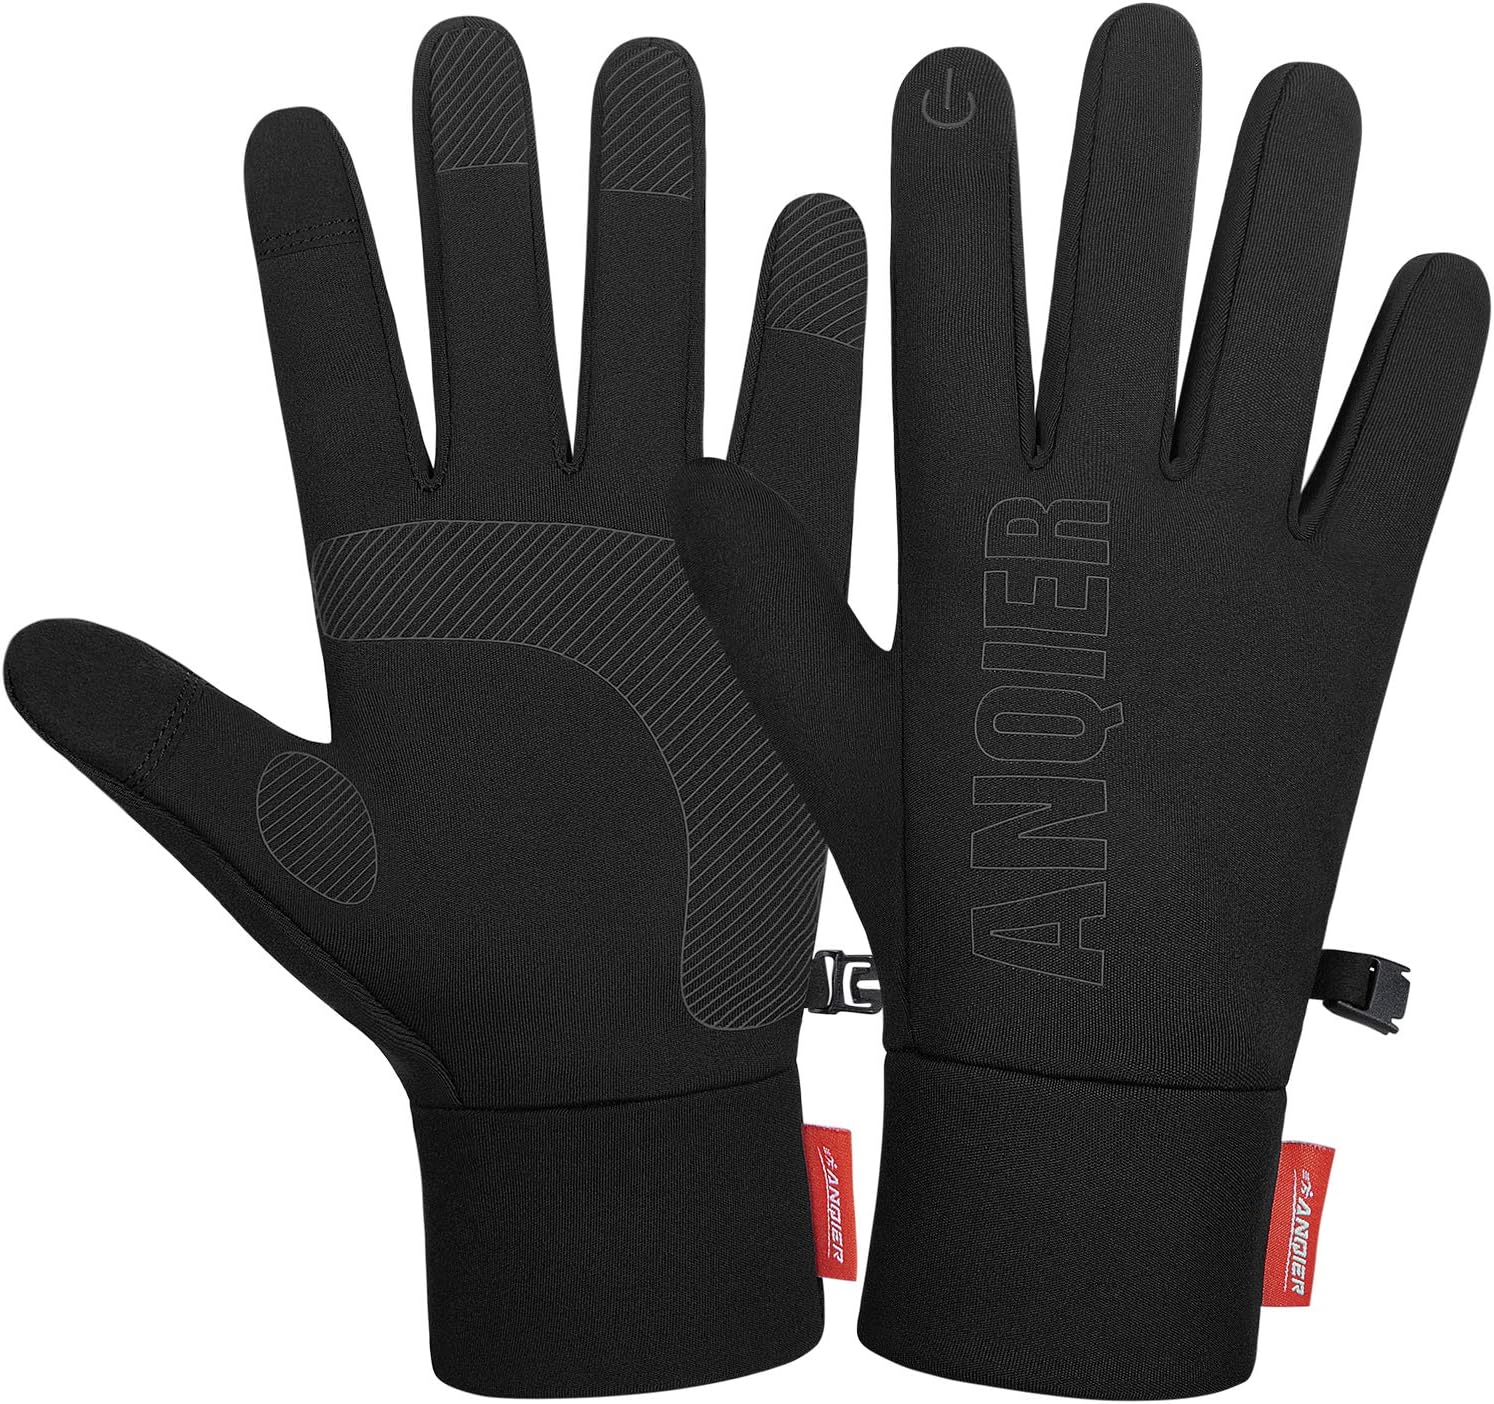 Limited-Time Discounts on coskefy Running Gloves - Claim Yours Now!